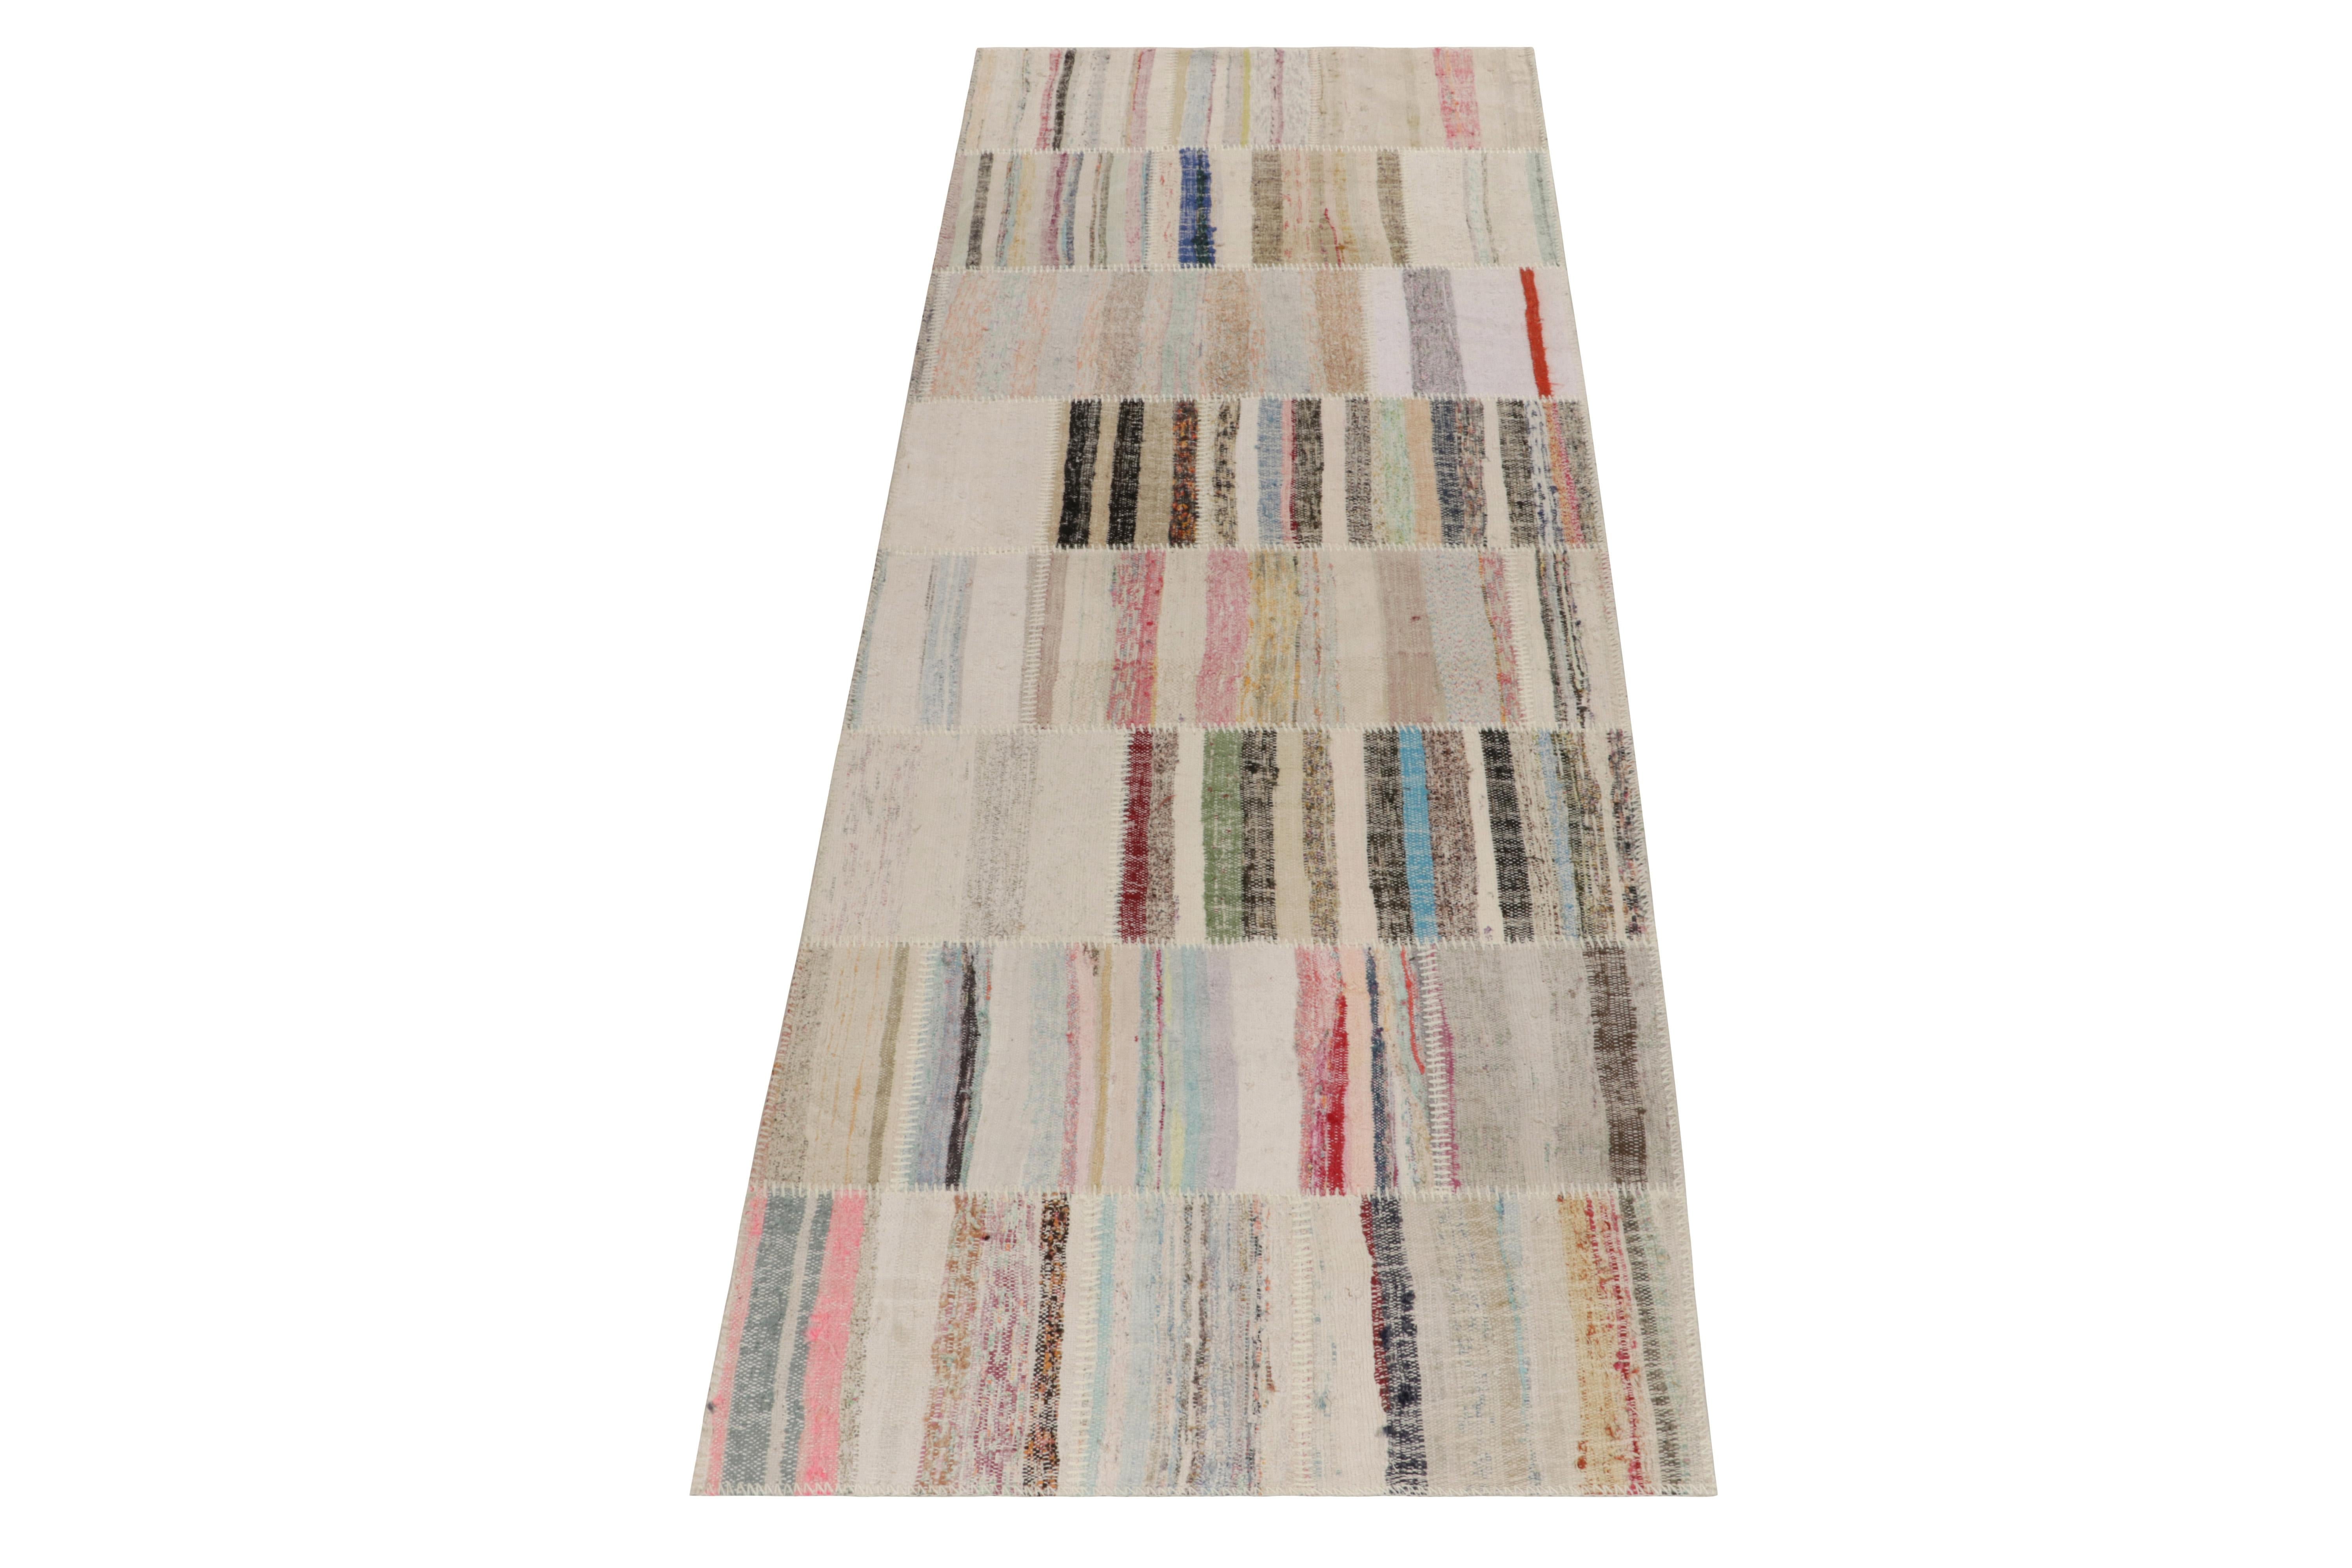 Rug & Kilim takes pride in presenting its artistic vision of patchwork kilim that reimagines vintage yarns into unique pieces of art. This 3x10 flatweave features a striated pattern that lends a smooth sense of movement in variegated shades across